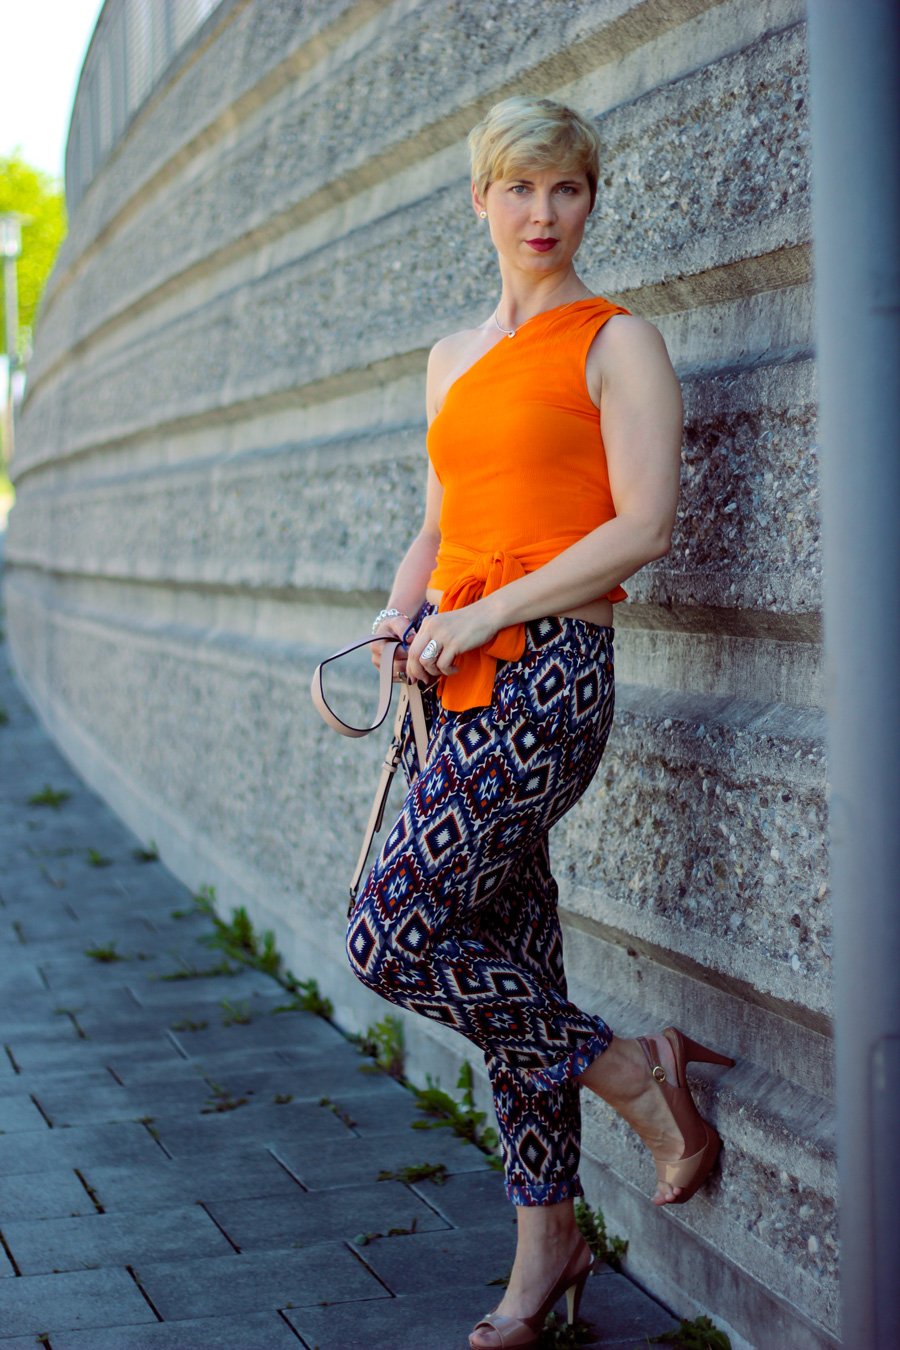 Conny Doll Lifestyle: Wickeltop in Orange, Ethno-Muster, Sommerlook, Pumps